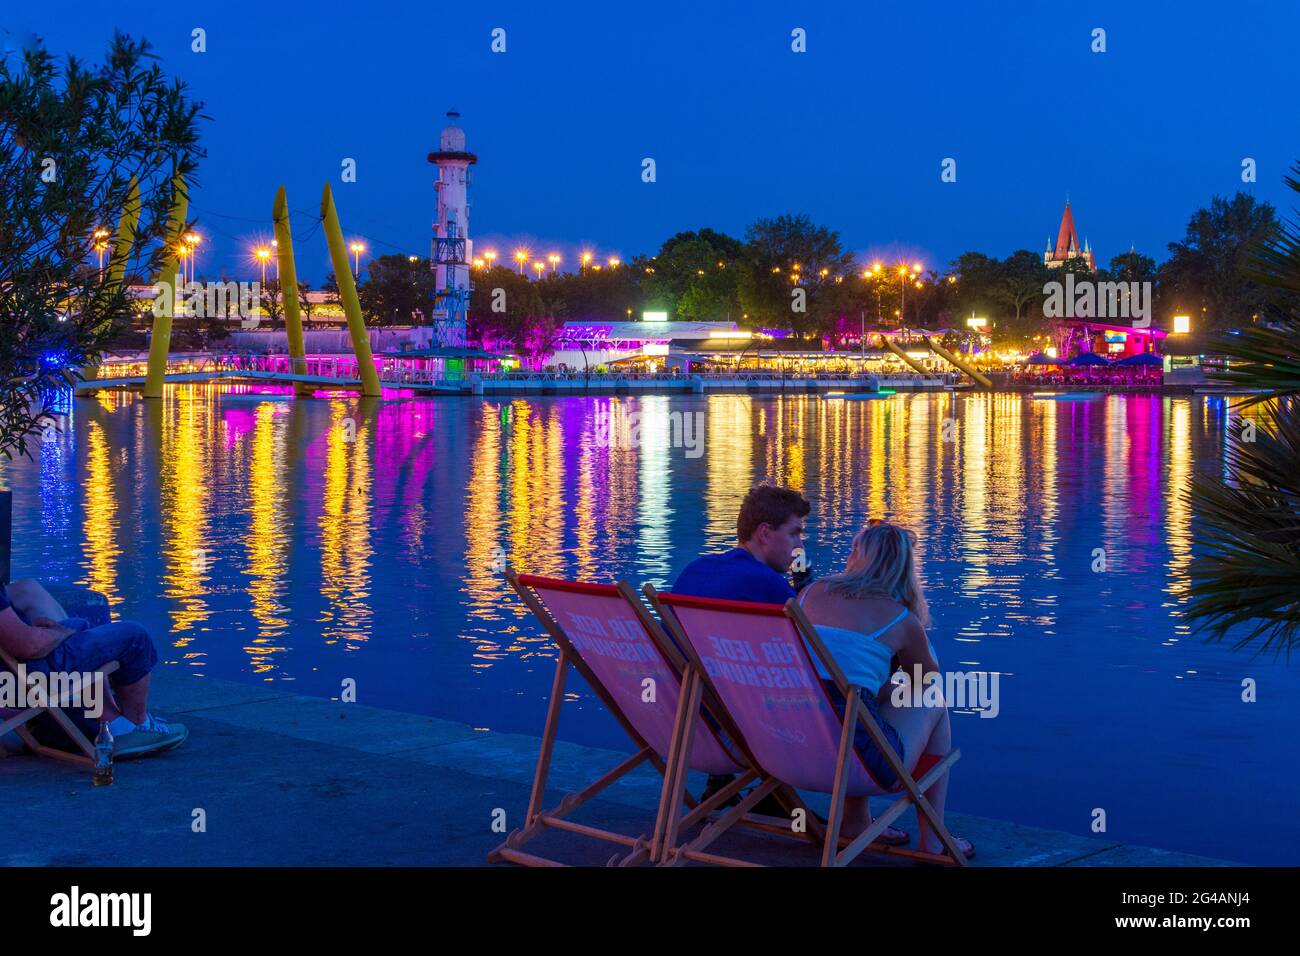 Wien, Vienna: recreational area Copa Beach at river Neue Donau (New Danube), view to Sunken City area at island Donauinsel, floating bridge, people on Stock Photo